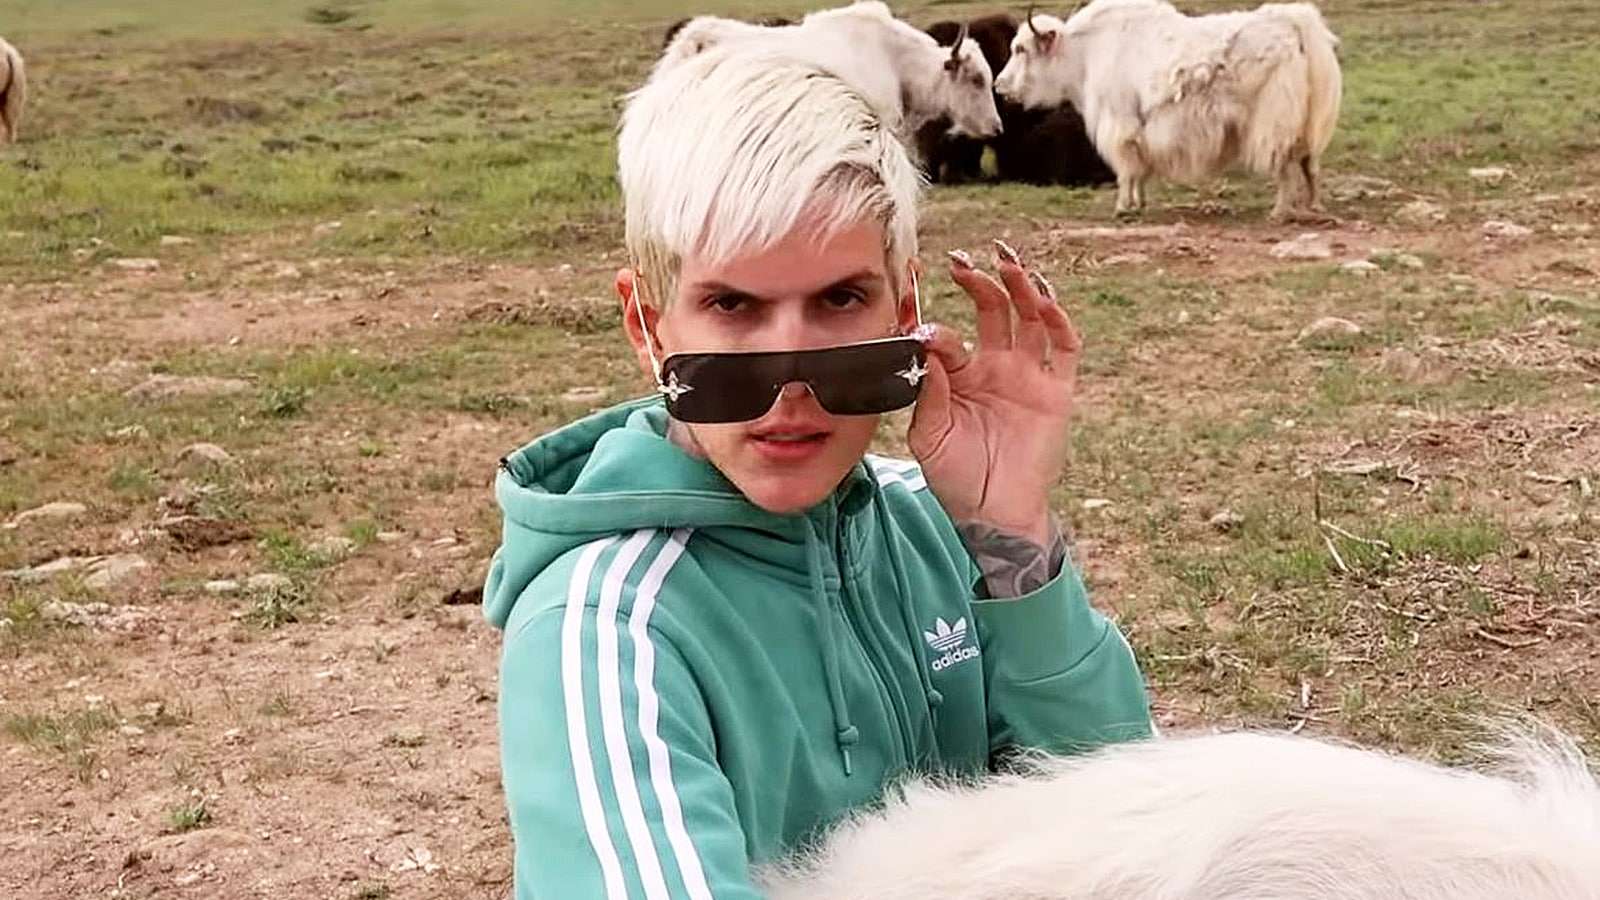 jeffree star opens up after yak meat scandal